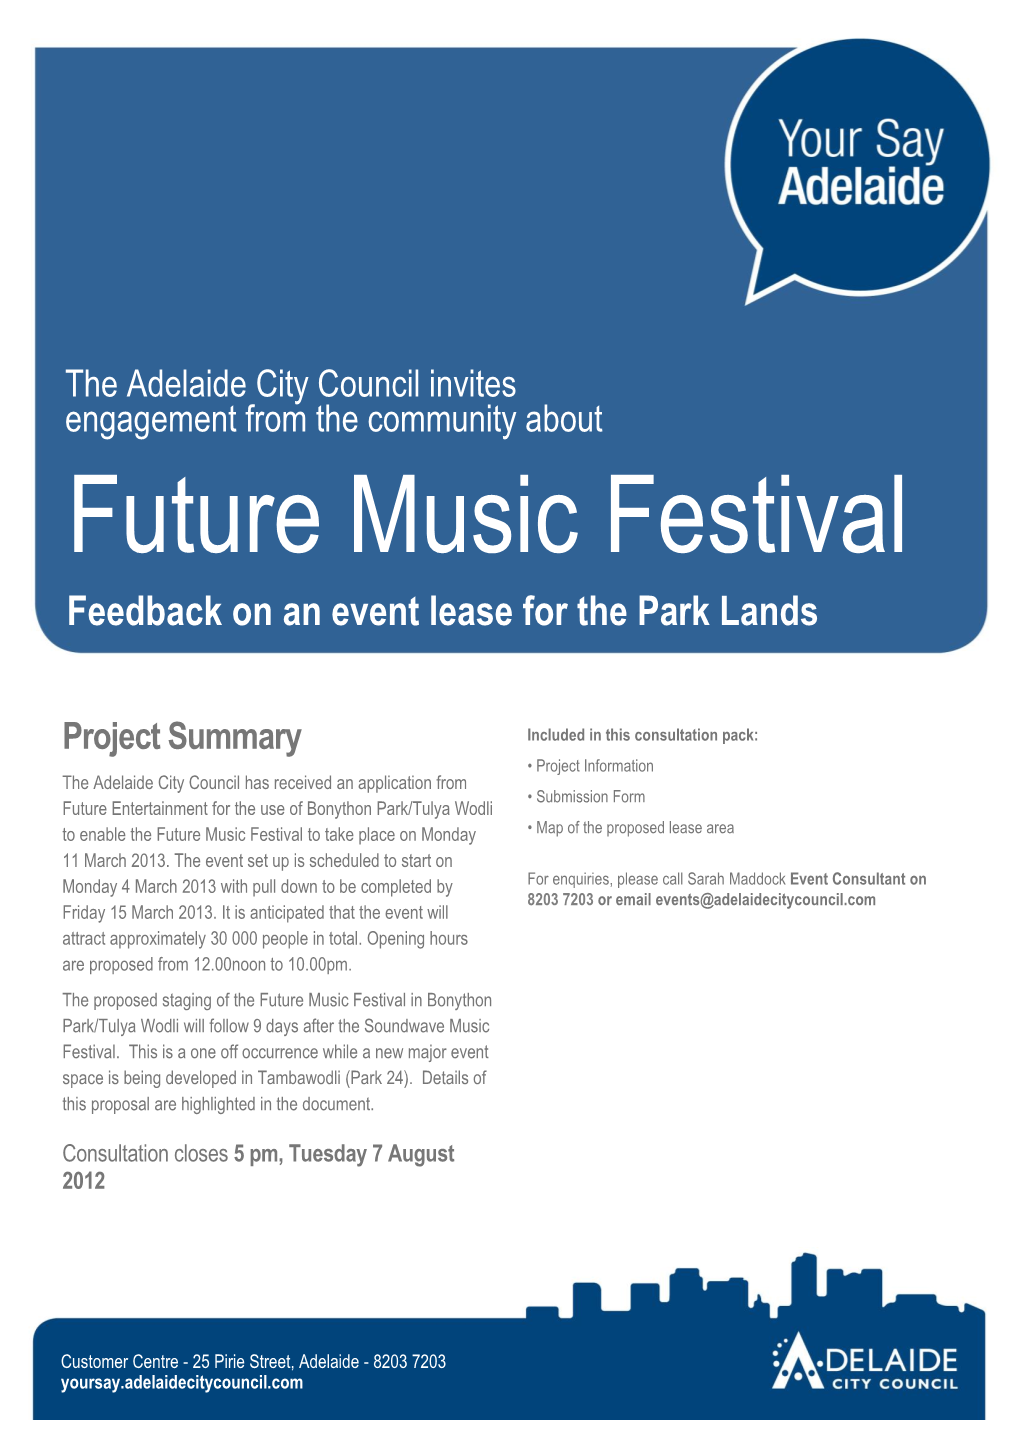 Future Music Festival Feedback on an Event Lease for the Park Lands